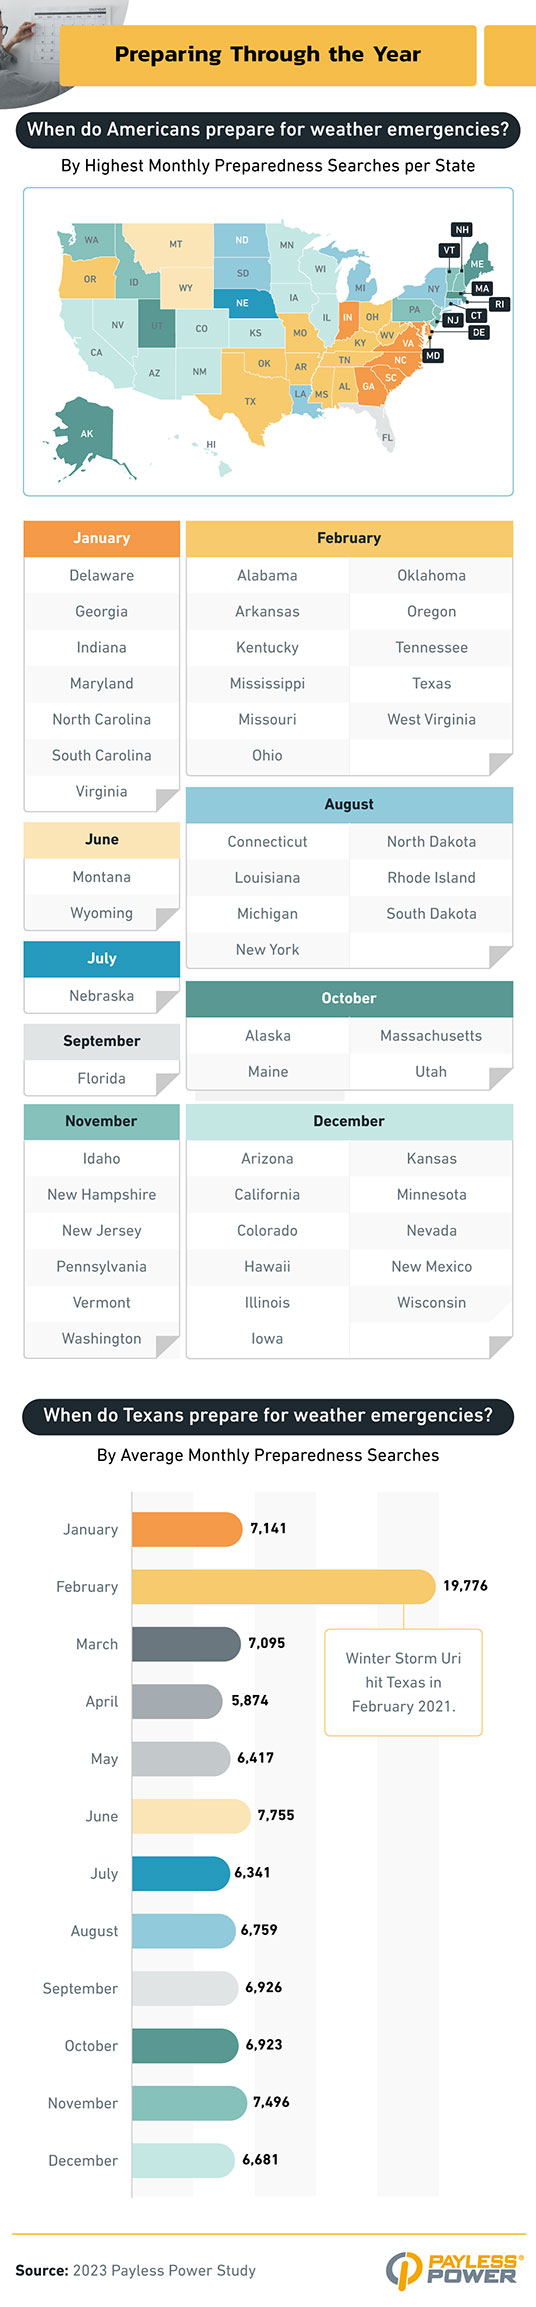 Infographic that explores when Americans prepapre for weather emergencies by highest monthly preparedness searches per state.